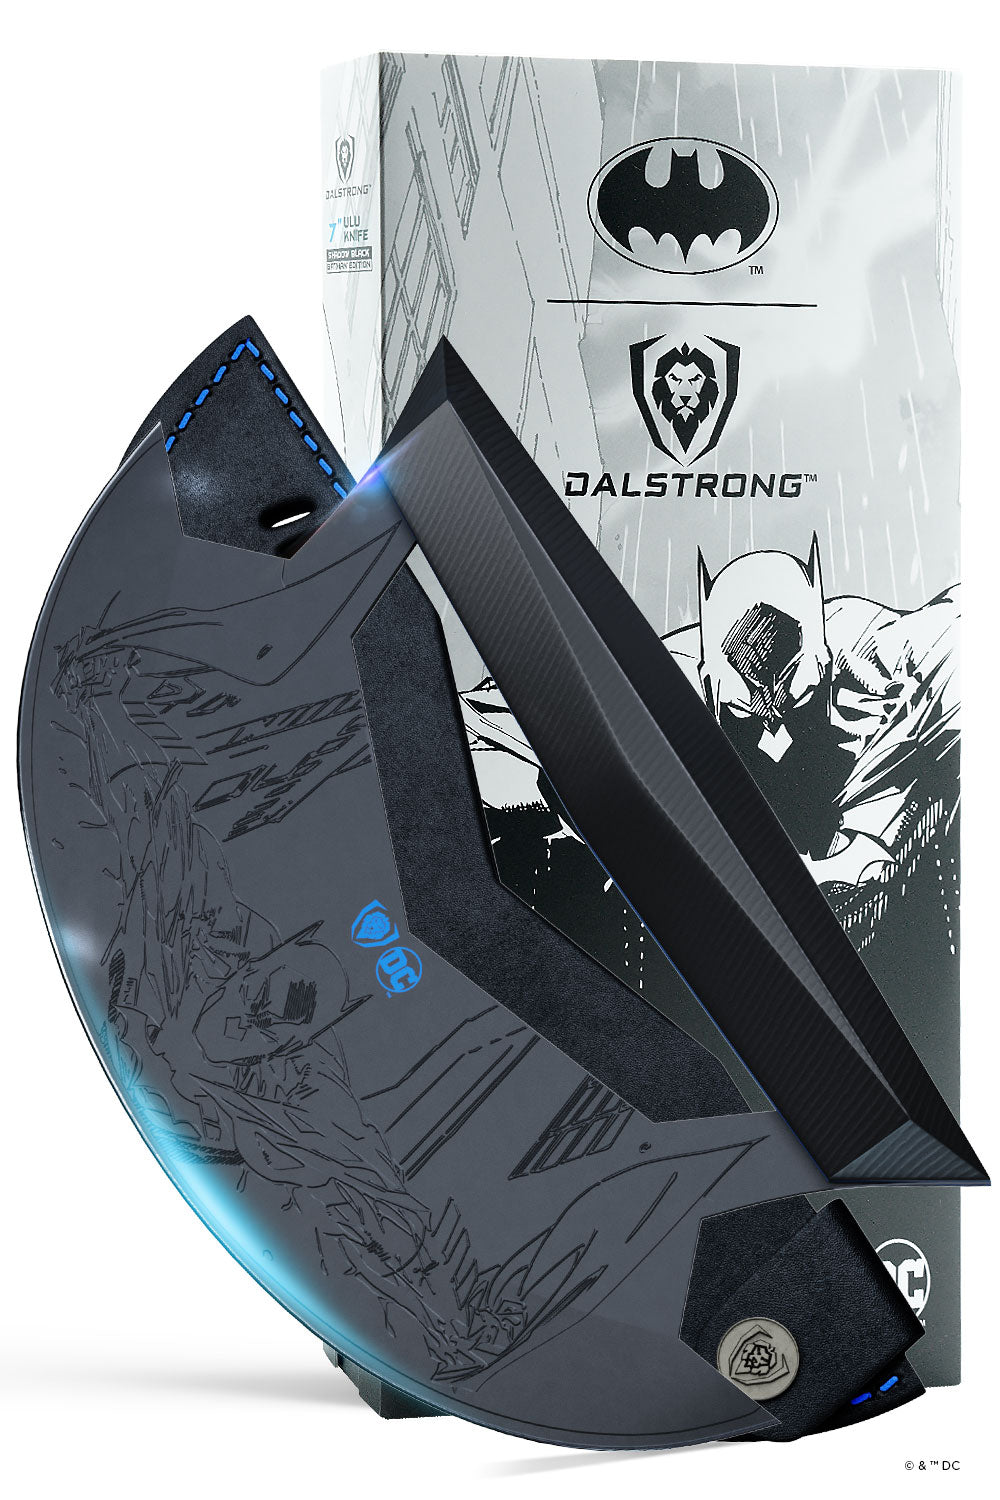 Dalstrong shadow black series batman edition 7 inch ulu knife in front of it's premium packaging.